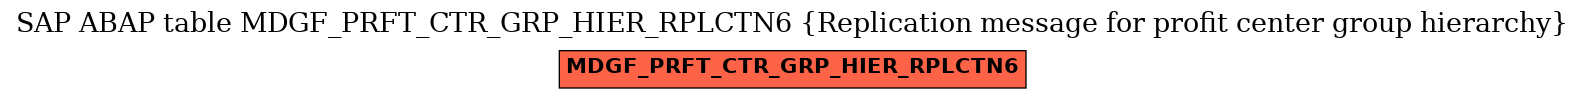 E-R Diagram for table MDGF_PRFT_CTR_GRP_HIER_RPLCTN6 (Replication message for profit center group hierarchy)